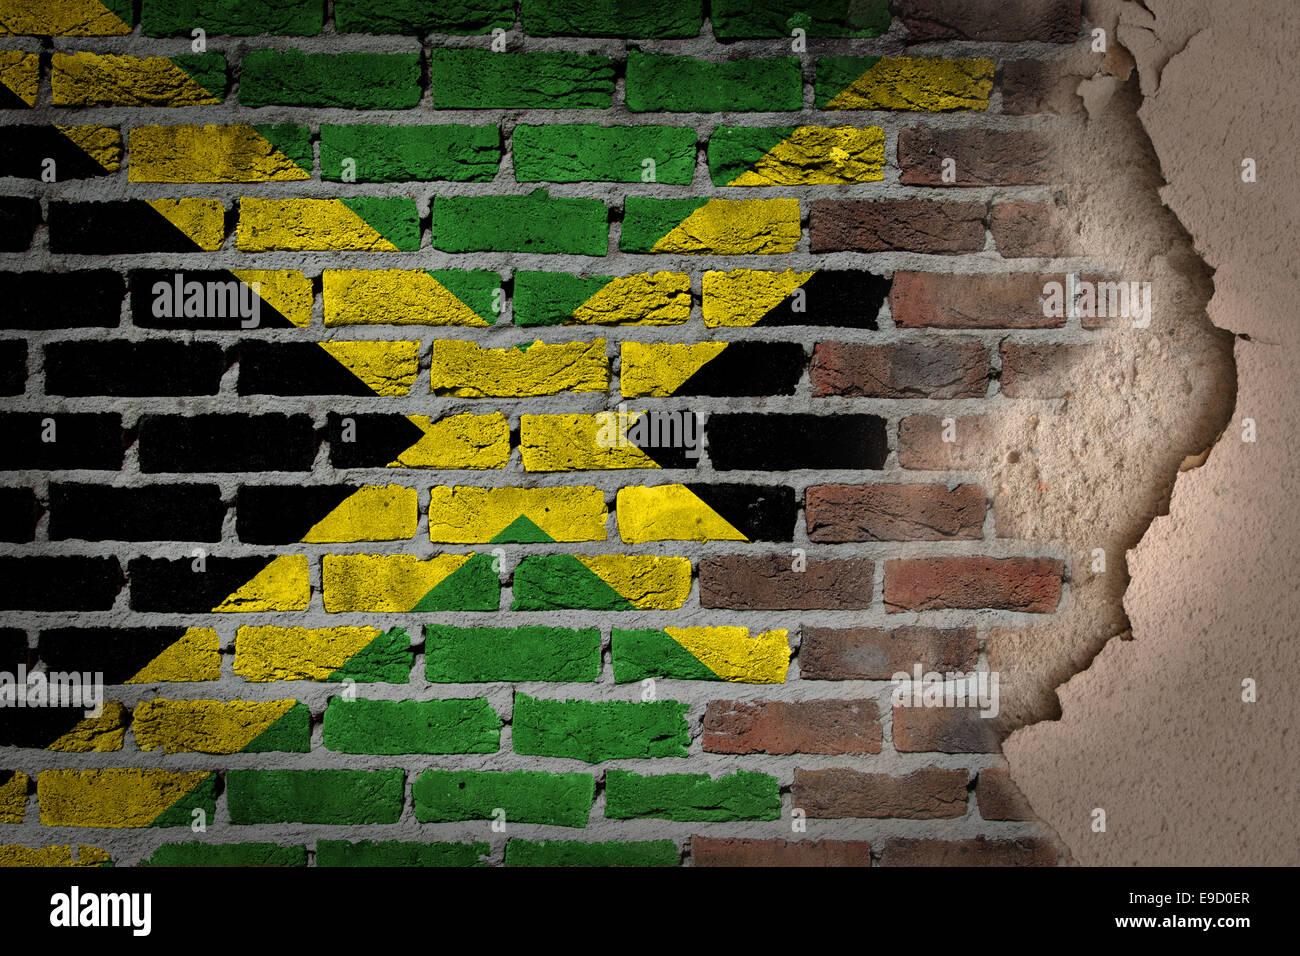 Dark brick wall texture with plaster - flag painted on wall - Jamaica Stock Photo